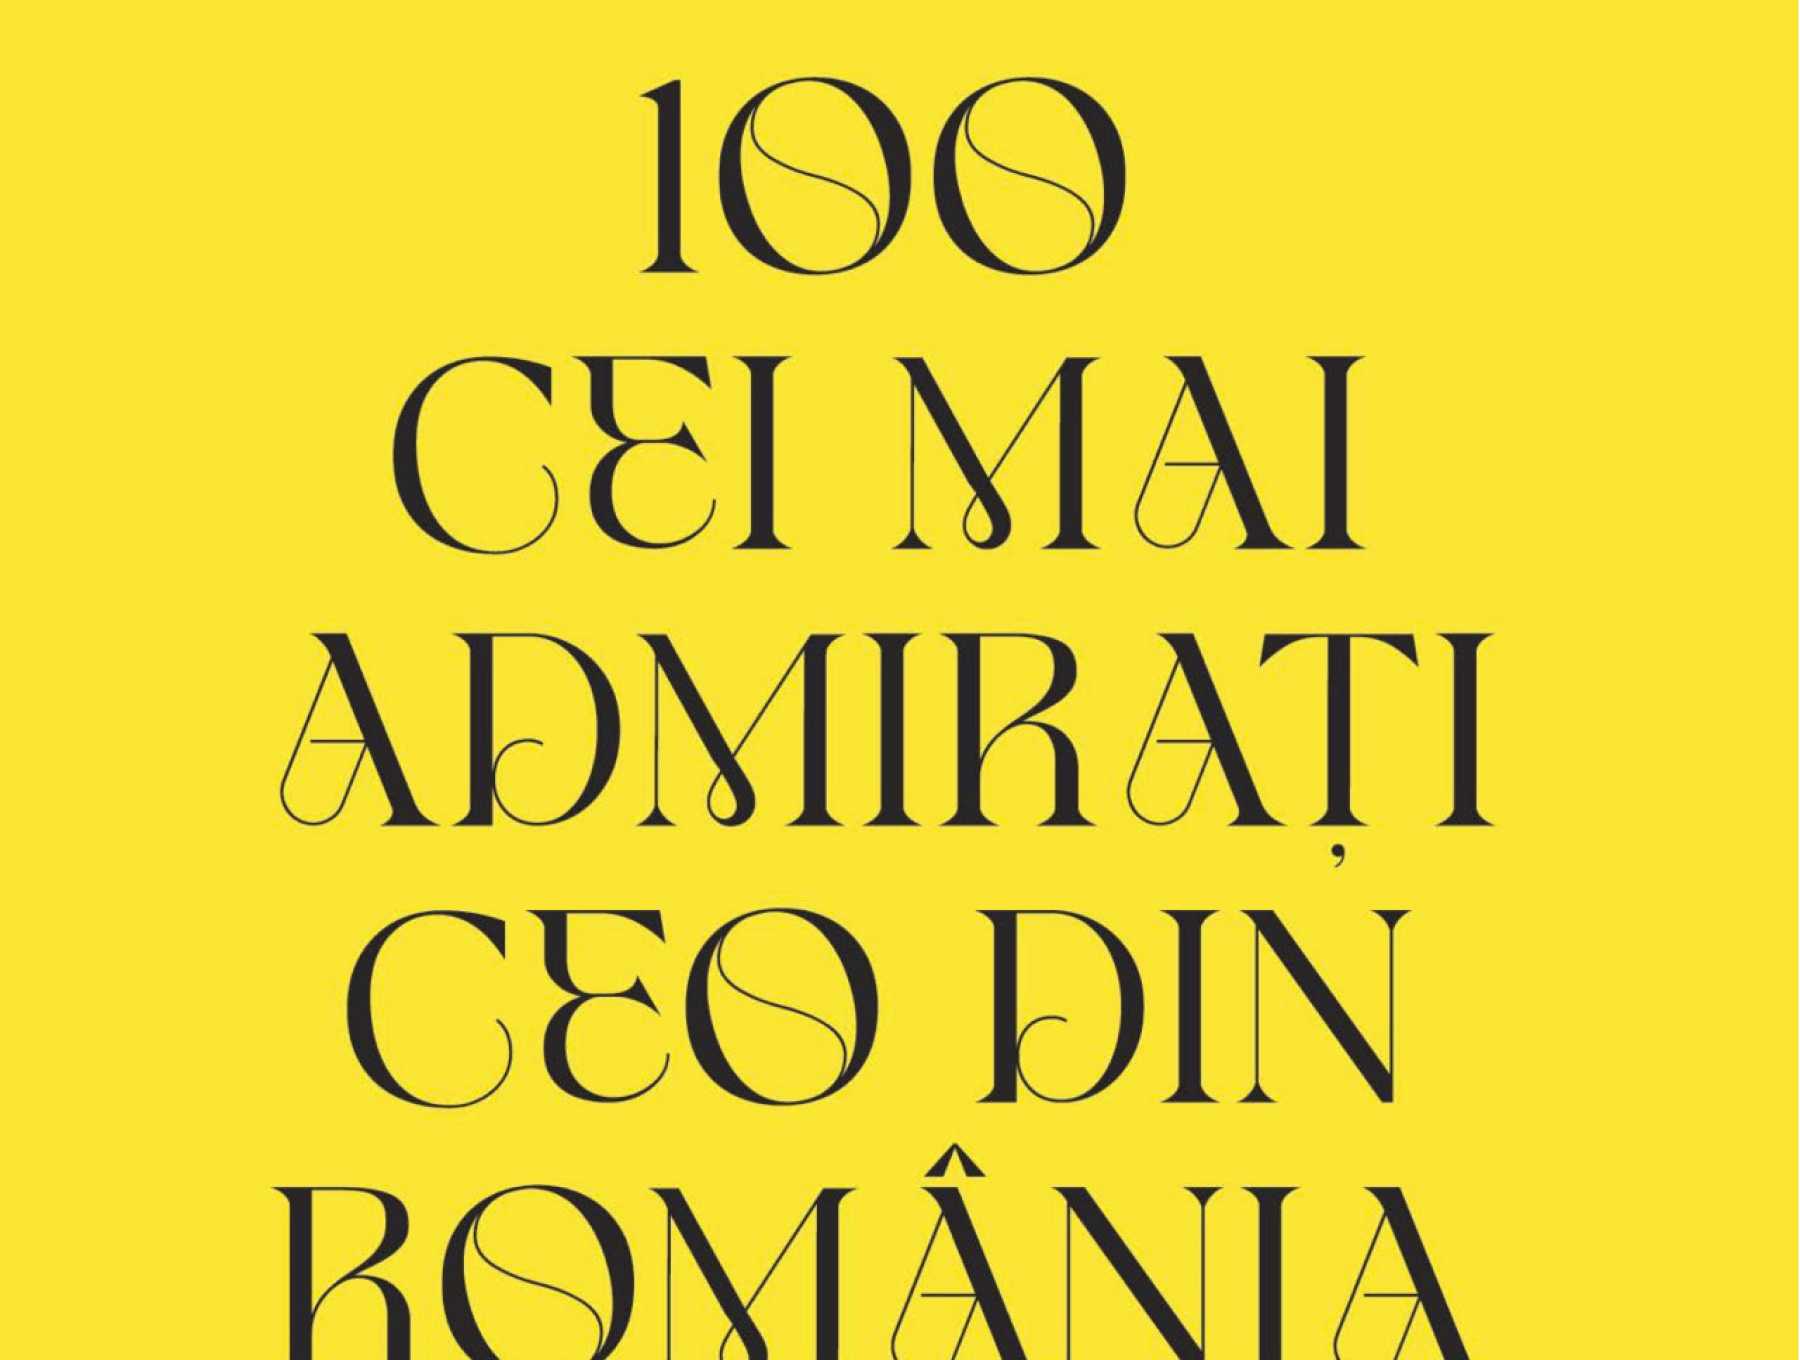 Victor Căpitanu, voted in Business Magazin "100 most admired CEOs in Romania" catalogue